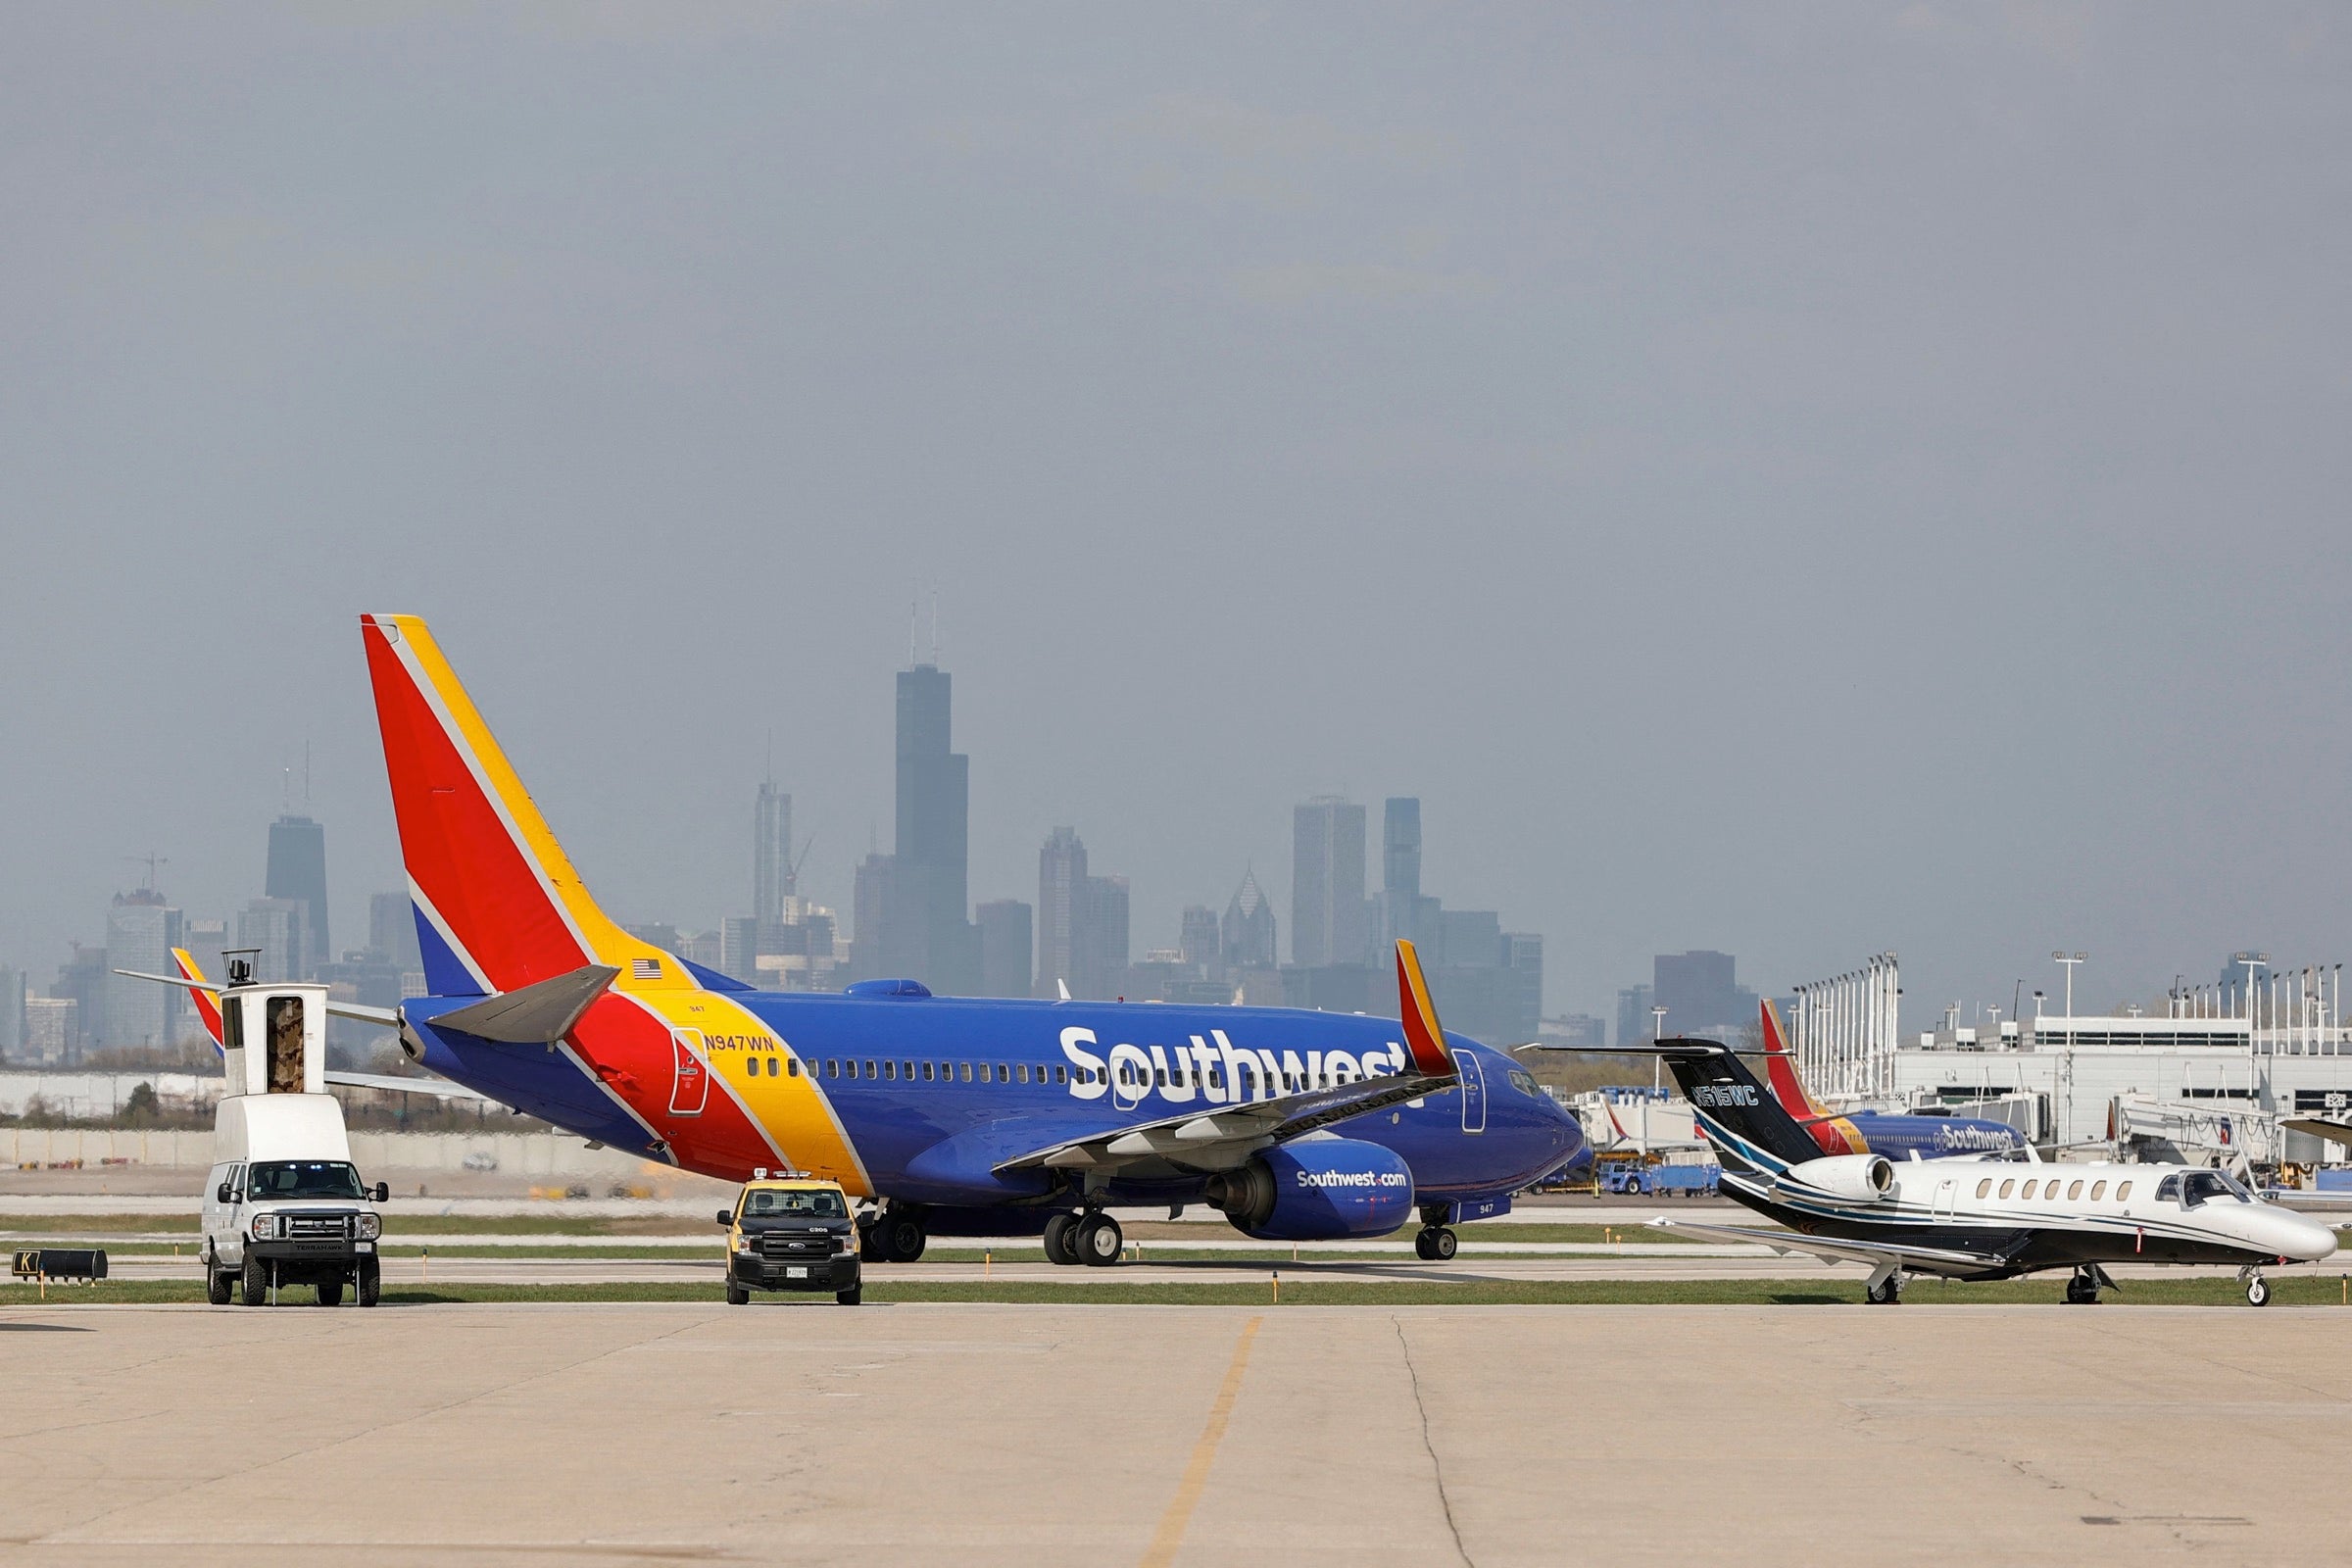 Southwest Boeing 737 taxxing at Chicago Midway Internatonal Airport